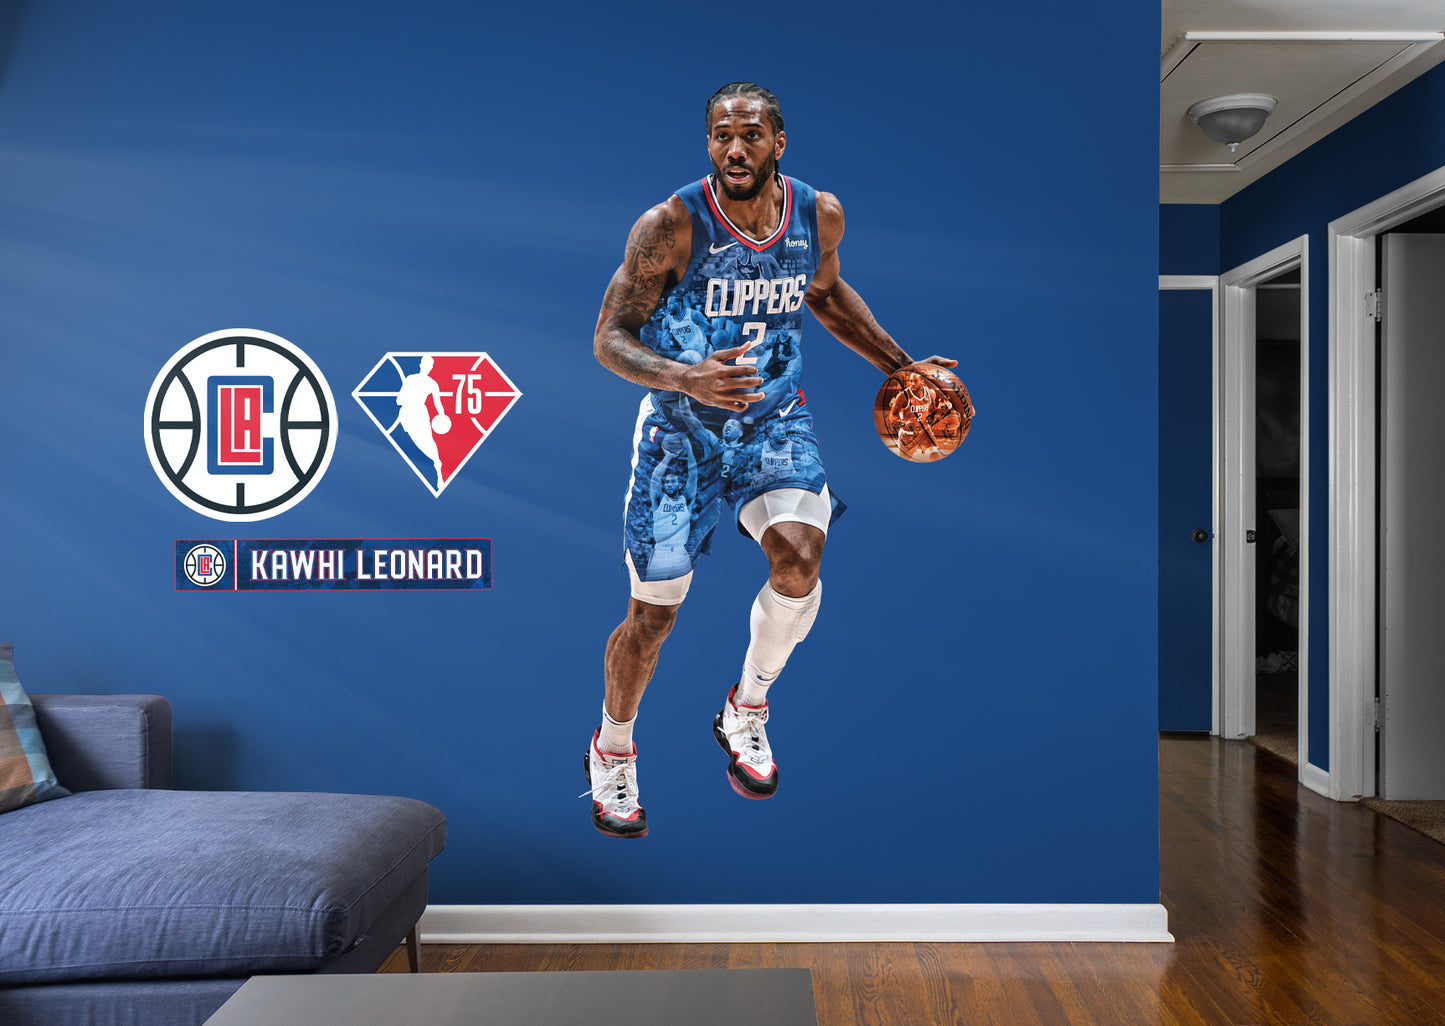 Los Angeles Clippers: Kawhi Leonard 2021 75th Anniversary Limited Edition        - Officially Licensed NBA Removable     Adhesive Decal